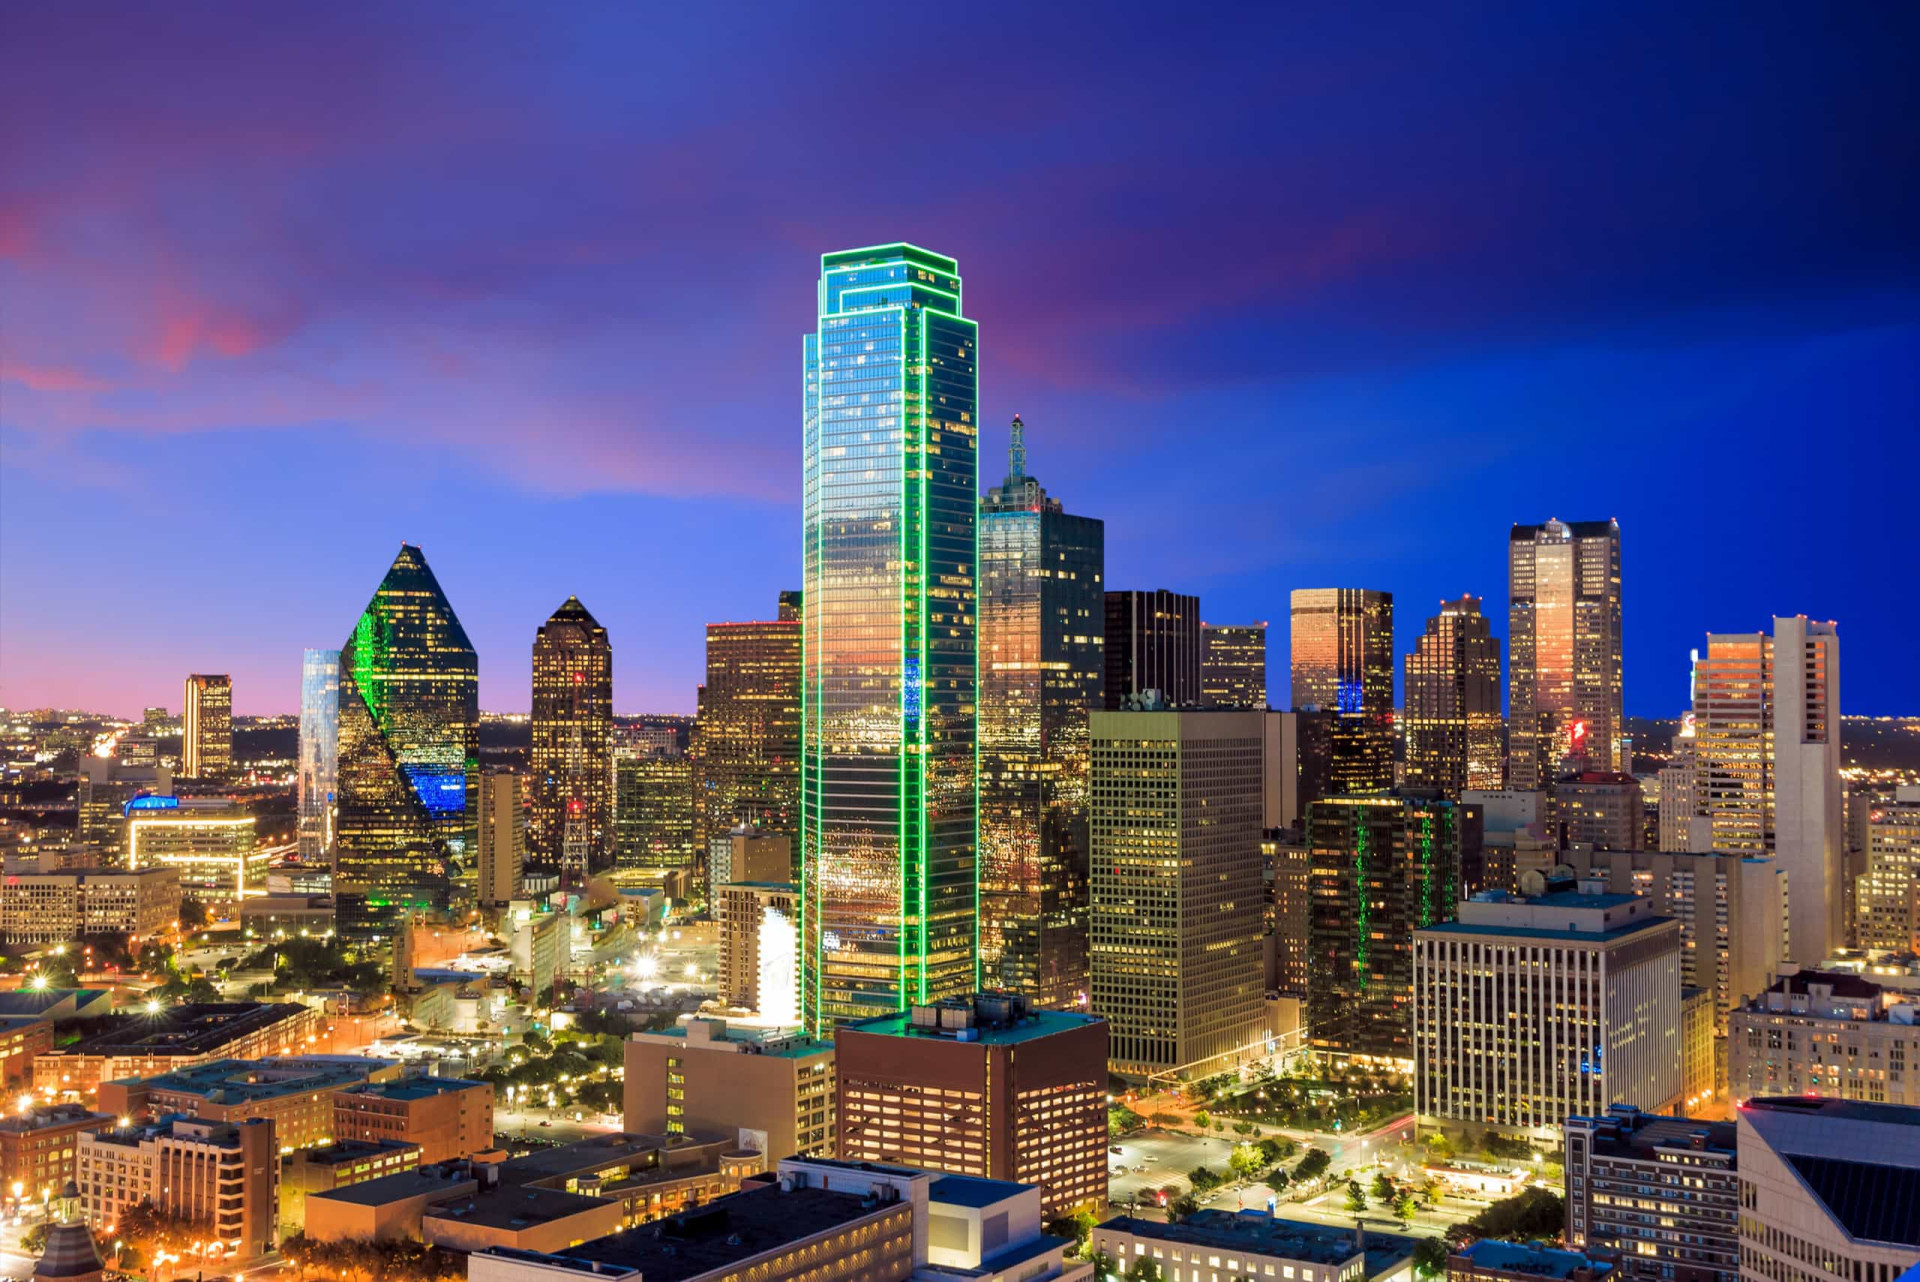 <p>Dallas has a population from a myriad of ethnic and religious backgrounds. And it can claim some pretty impressive celebrity credentials, too.</p><p><a href="https://www.msn.com/en-ca/community/channel/vid-7xx8mnucu55yw63we9va2gwr7uihbxwc68fxqp25x6tg4ftibpra?cvid=94631541bc0f4f89bfd59158d696ad7e">Follow us and access great exclusive content every day</a></p>